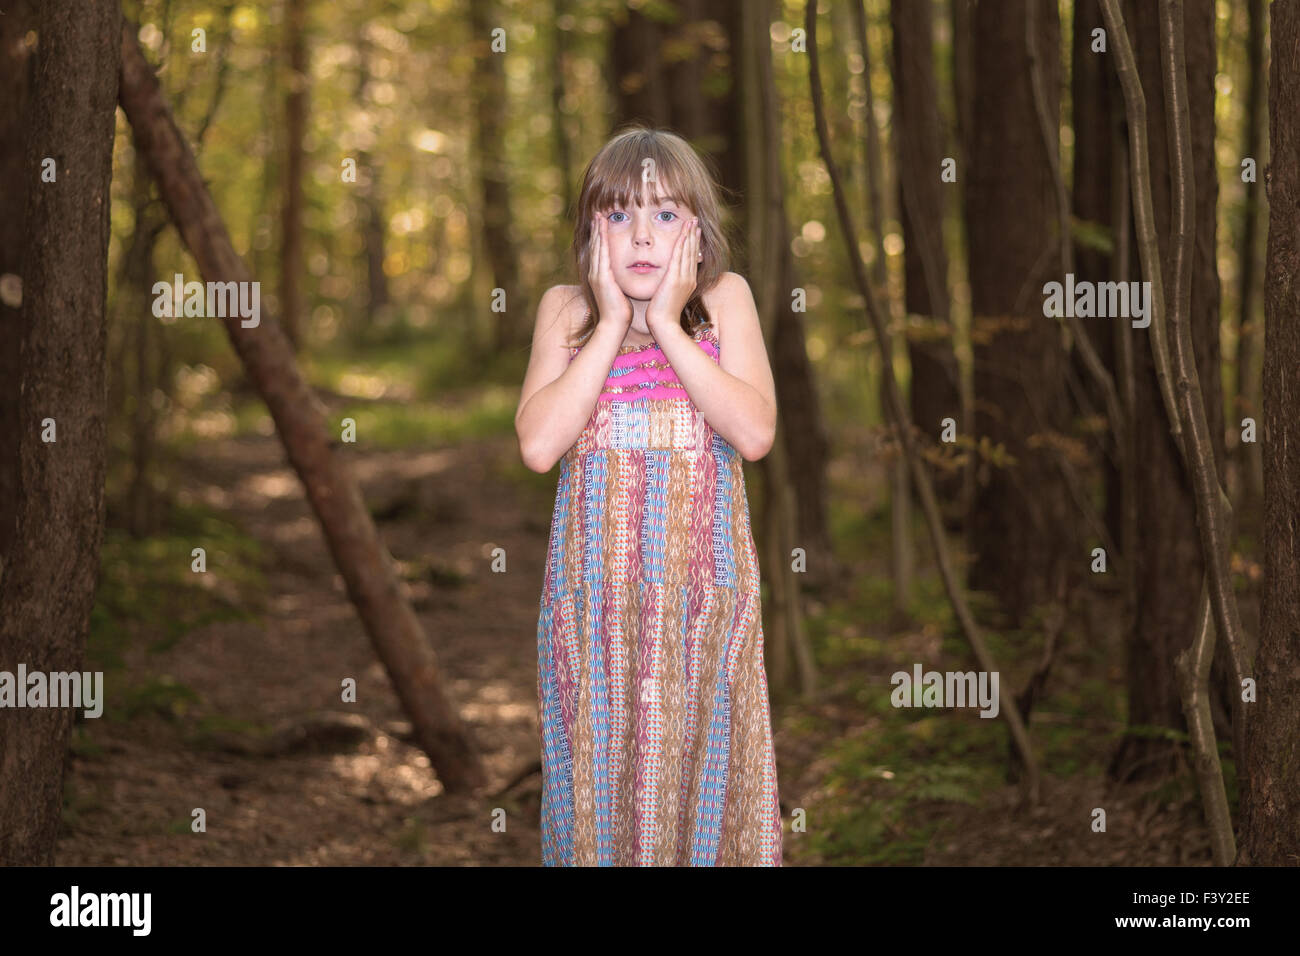 Lost little girl in the forest. Stock Photo